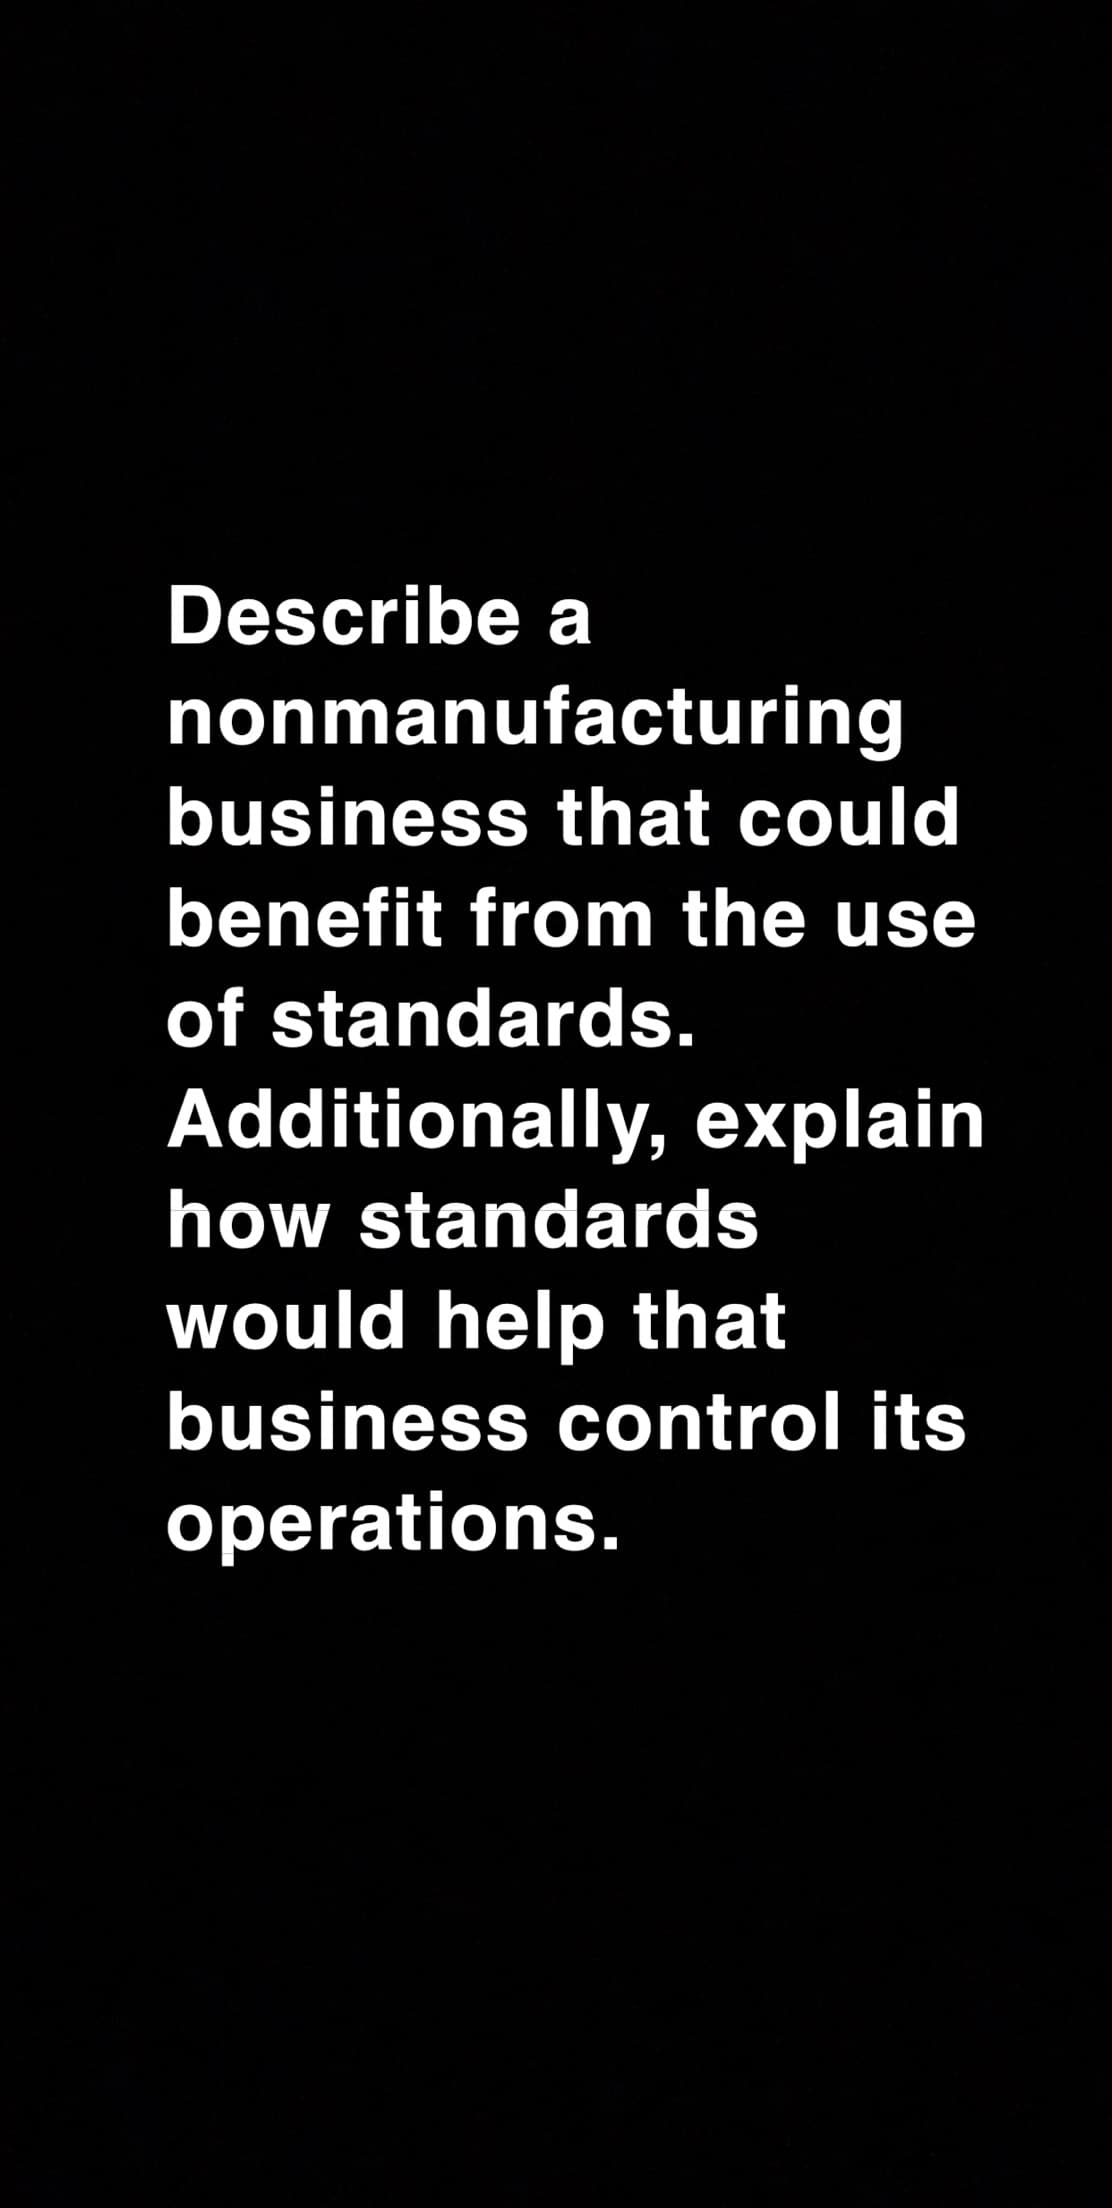 Describe a
nonmanufacturing
business that could
benefit from the use
of standards.
Additionally, explain
how standards
would help that
business control its
operations.
